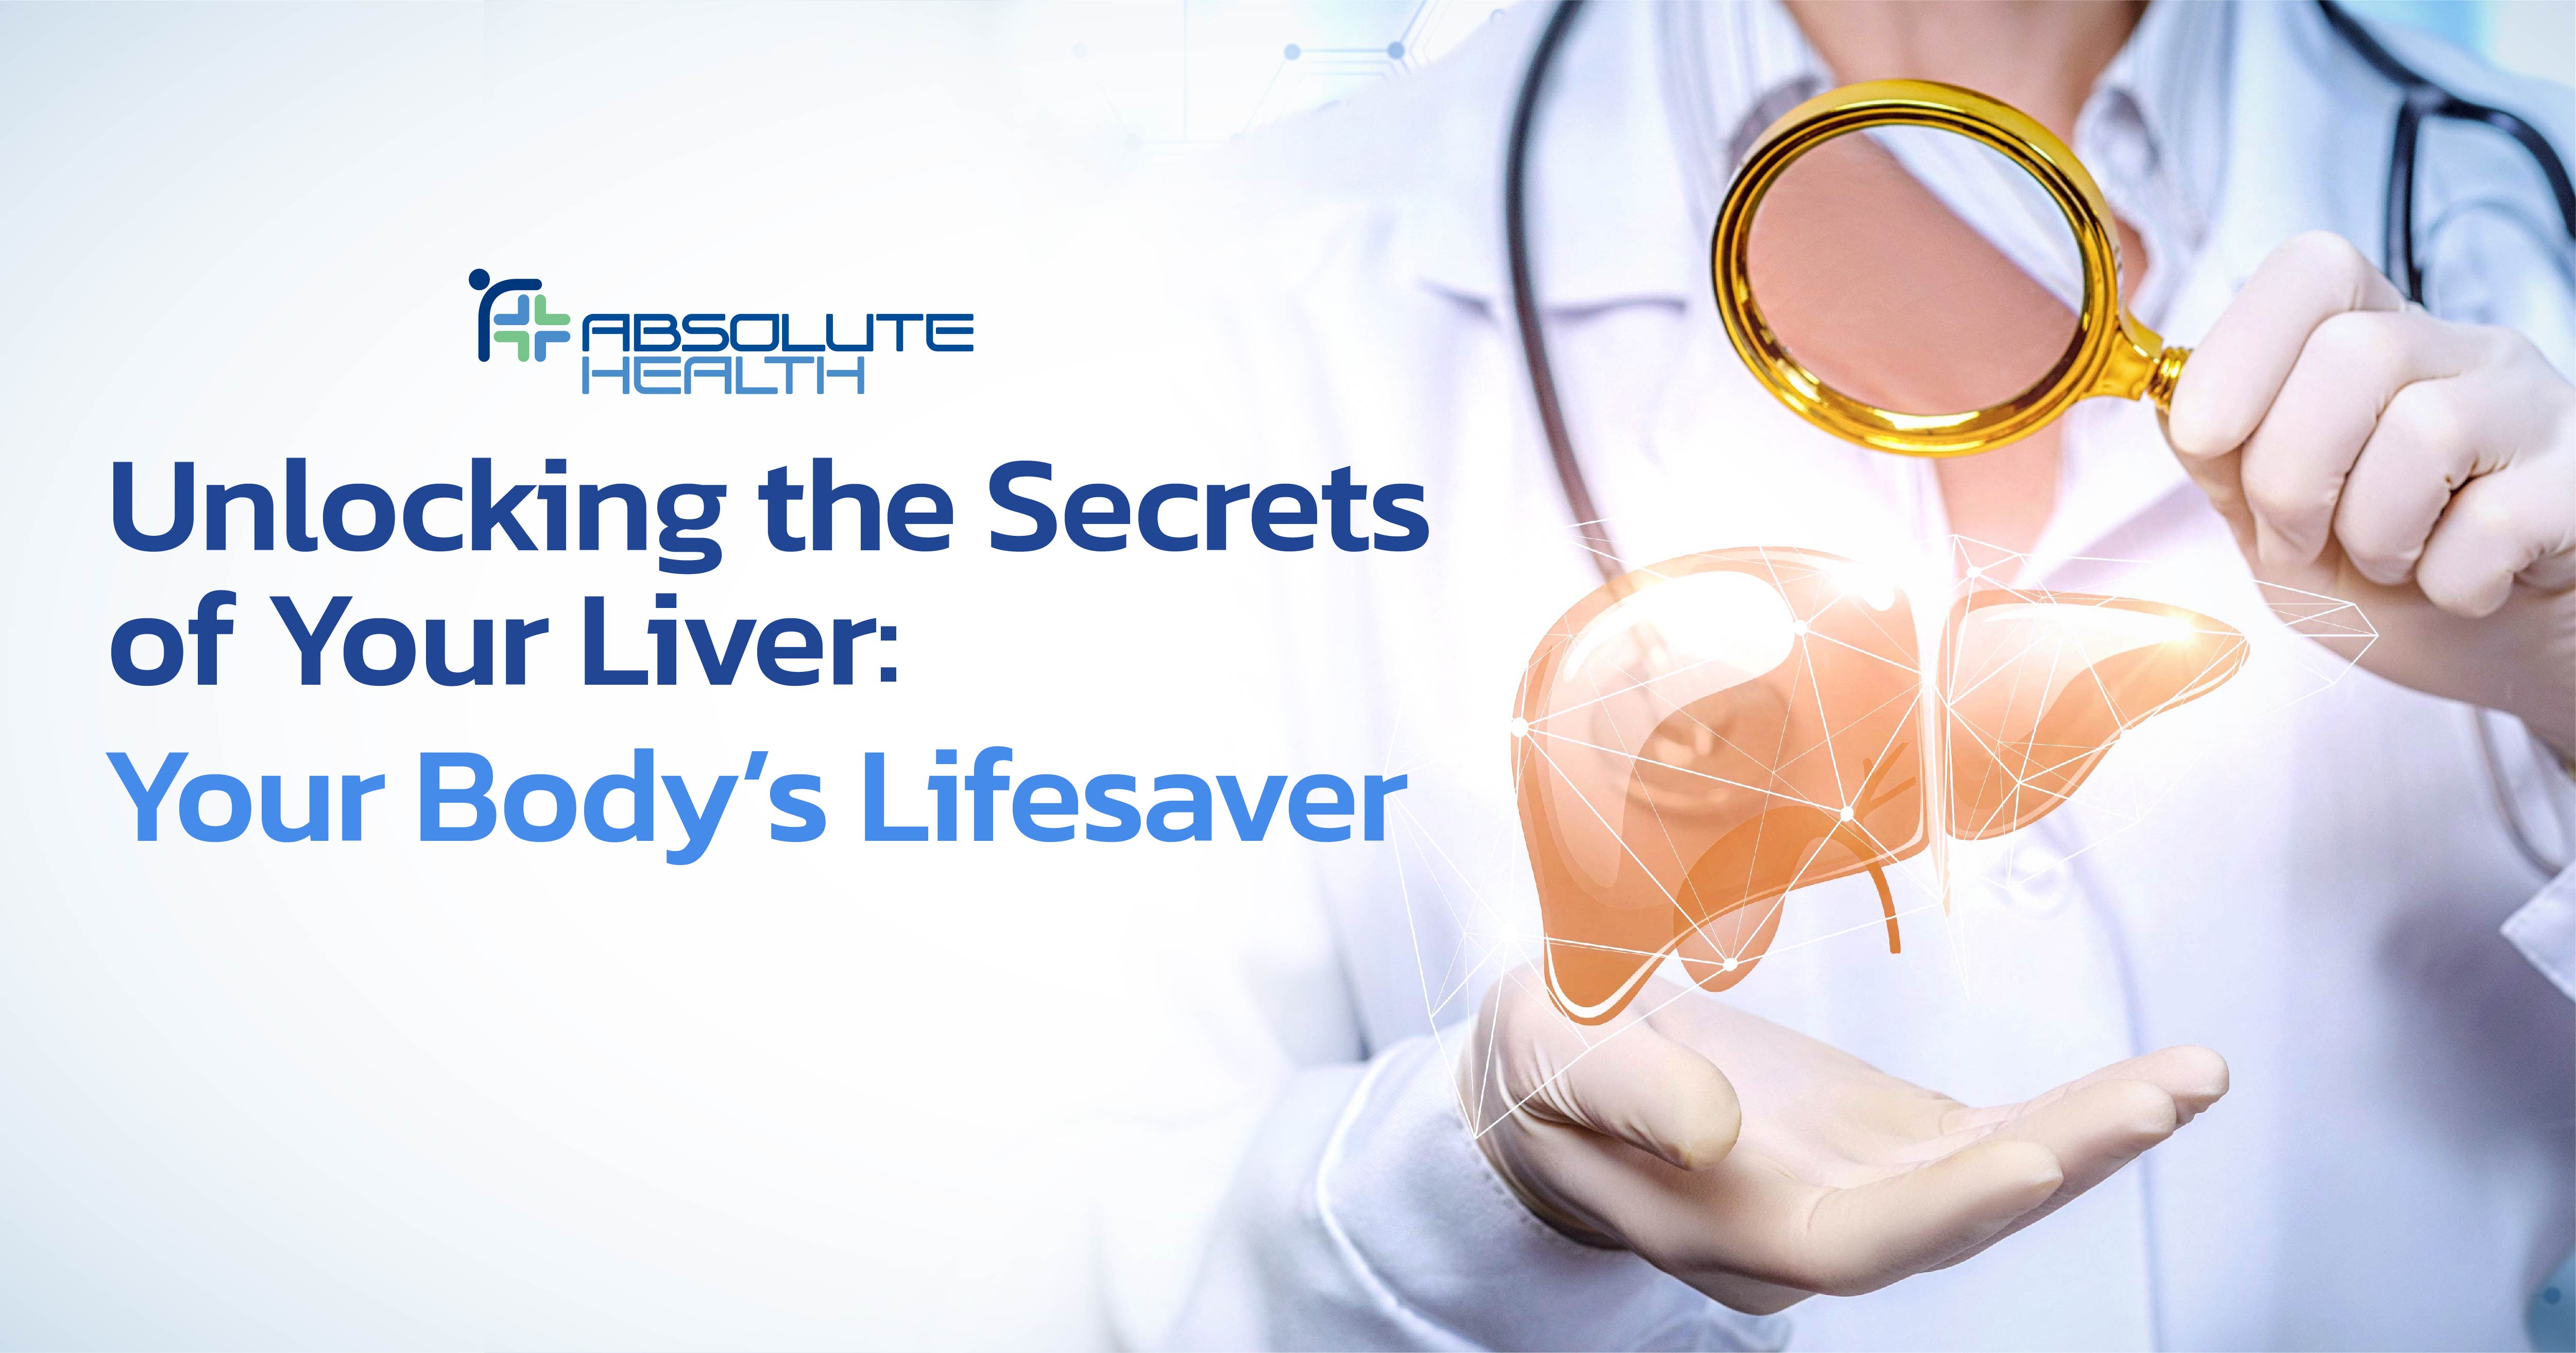 Unlocking the Secrets of Your Liver: Your Body's Lifesaver